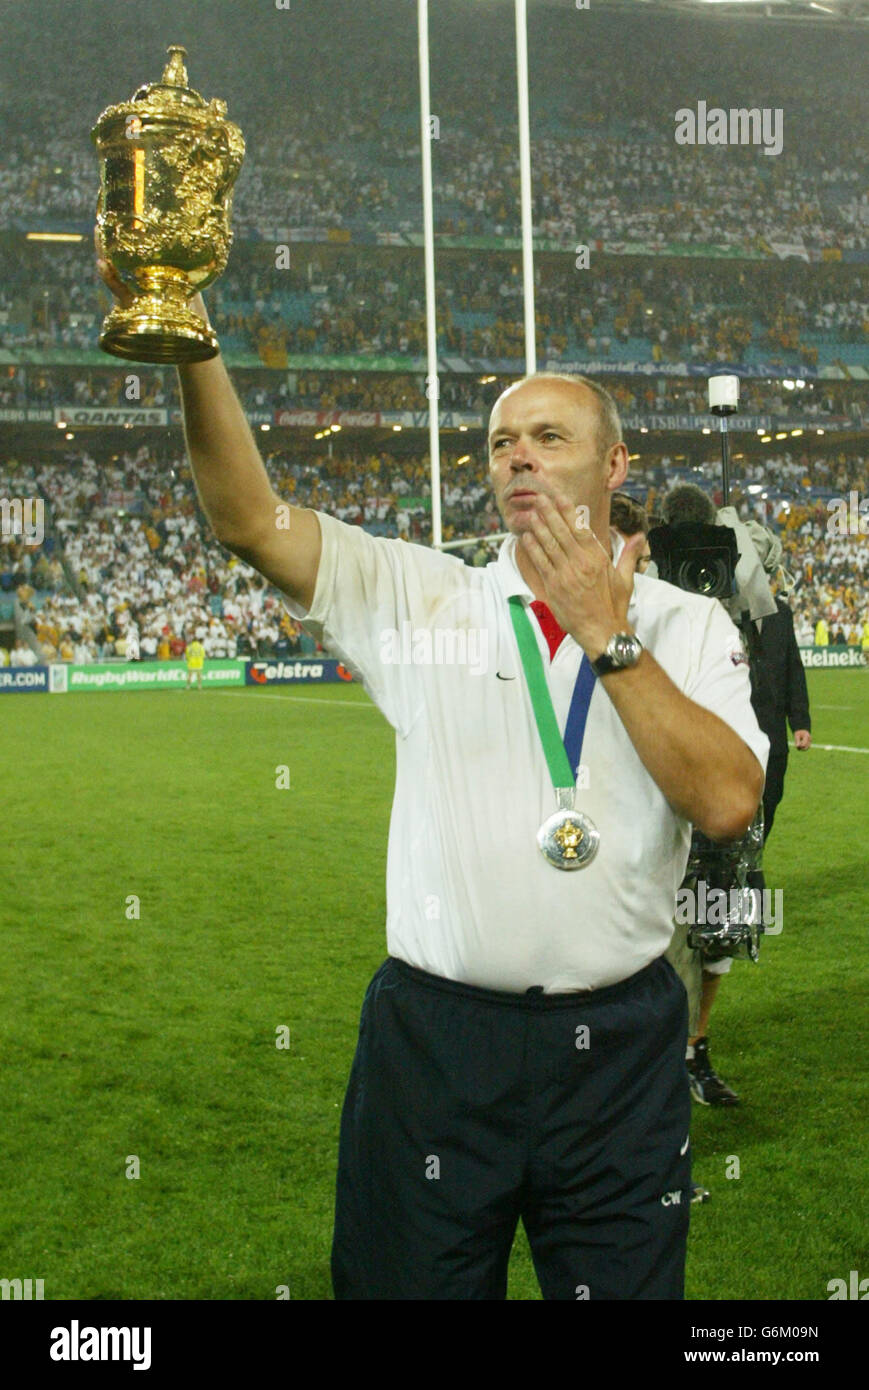 England coach Clive Woodward lifts the Webb Ellis trophy aloft after beating Australia in the Rugby World Cup Final at the Telstra Stadium, Sydney, Australia. No mobile phone use, Internet sites may only use one image every five minutes during match Stock Photo